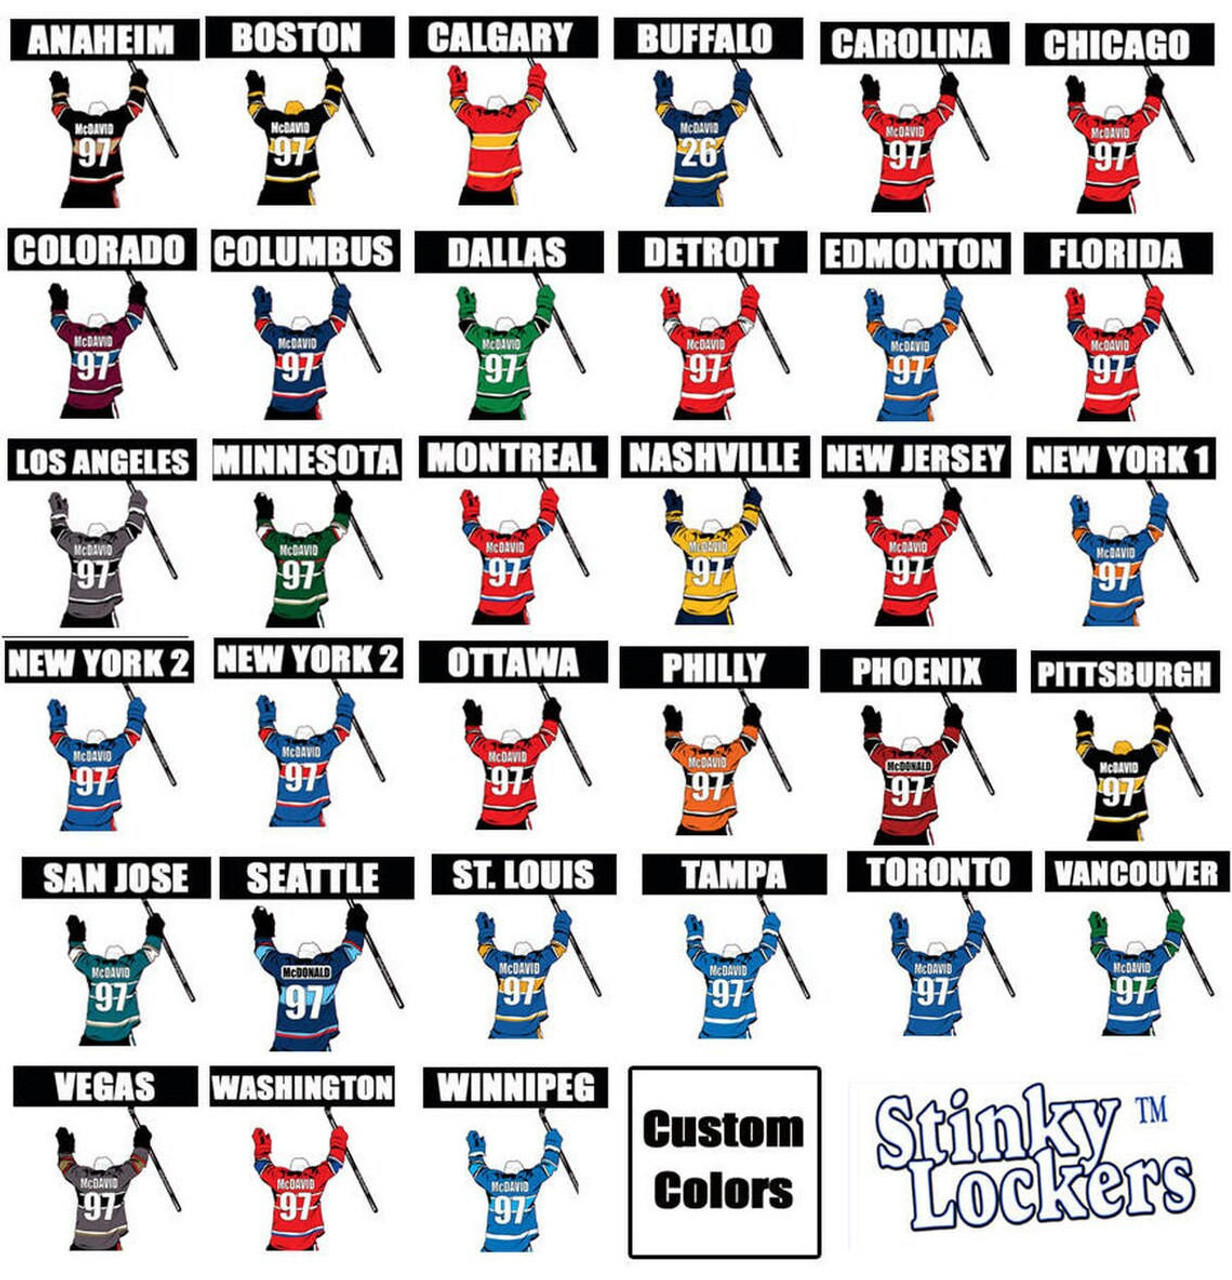 Stinky Lockers Personalized Goalie Stickers-6 Pack 